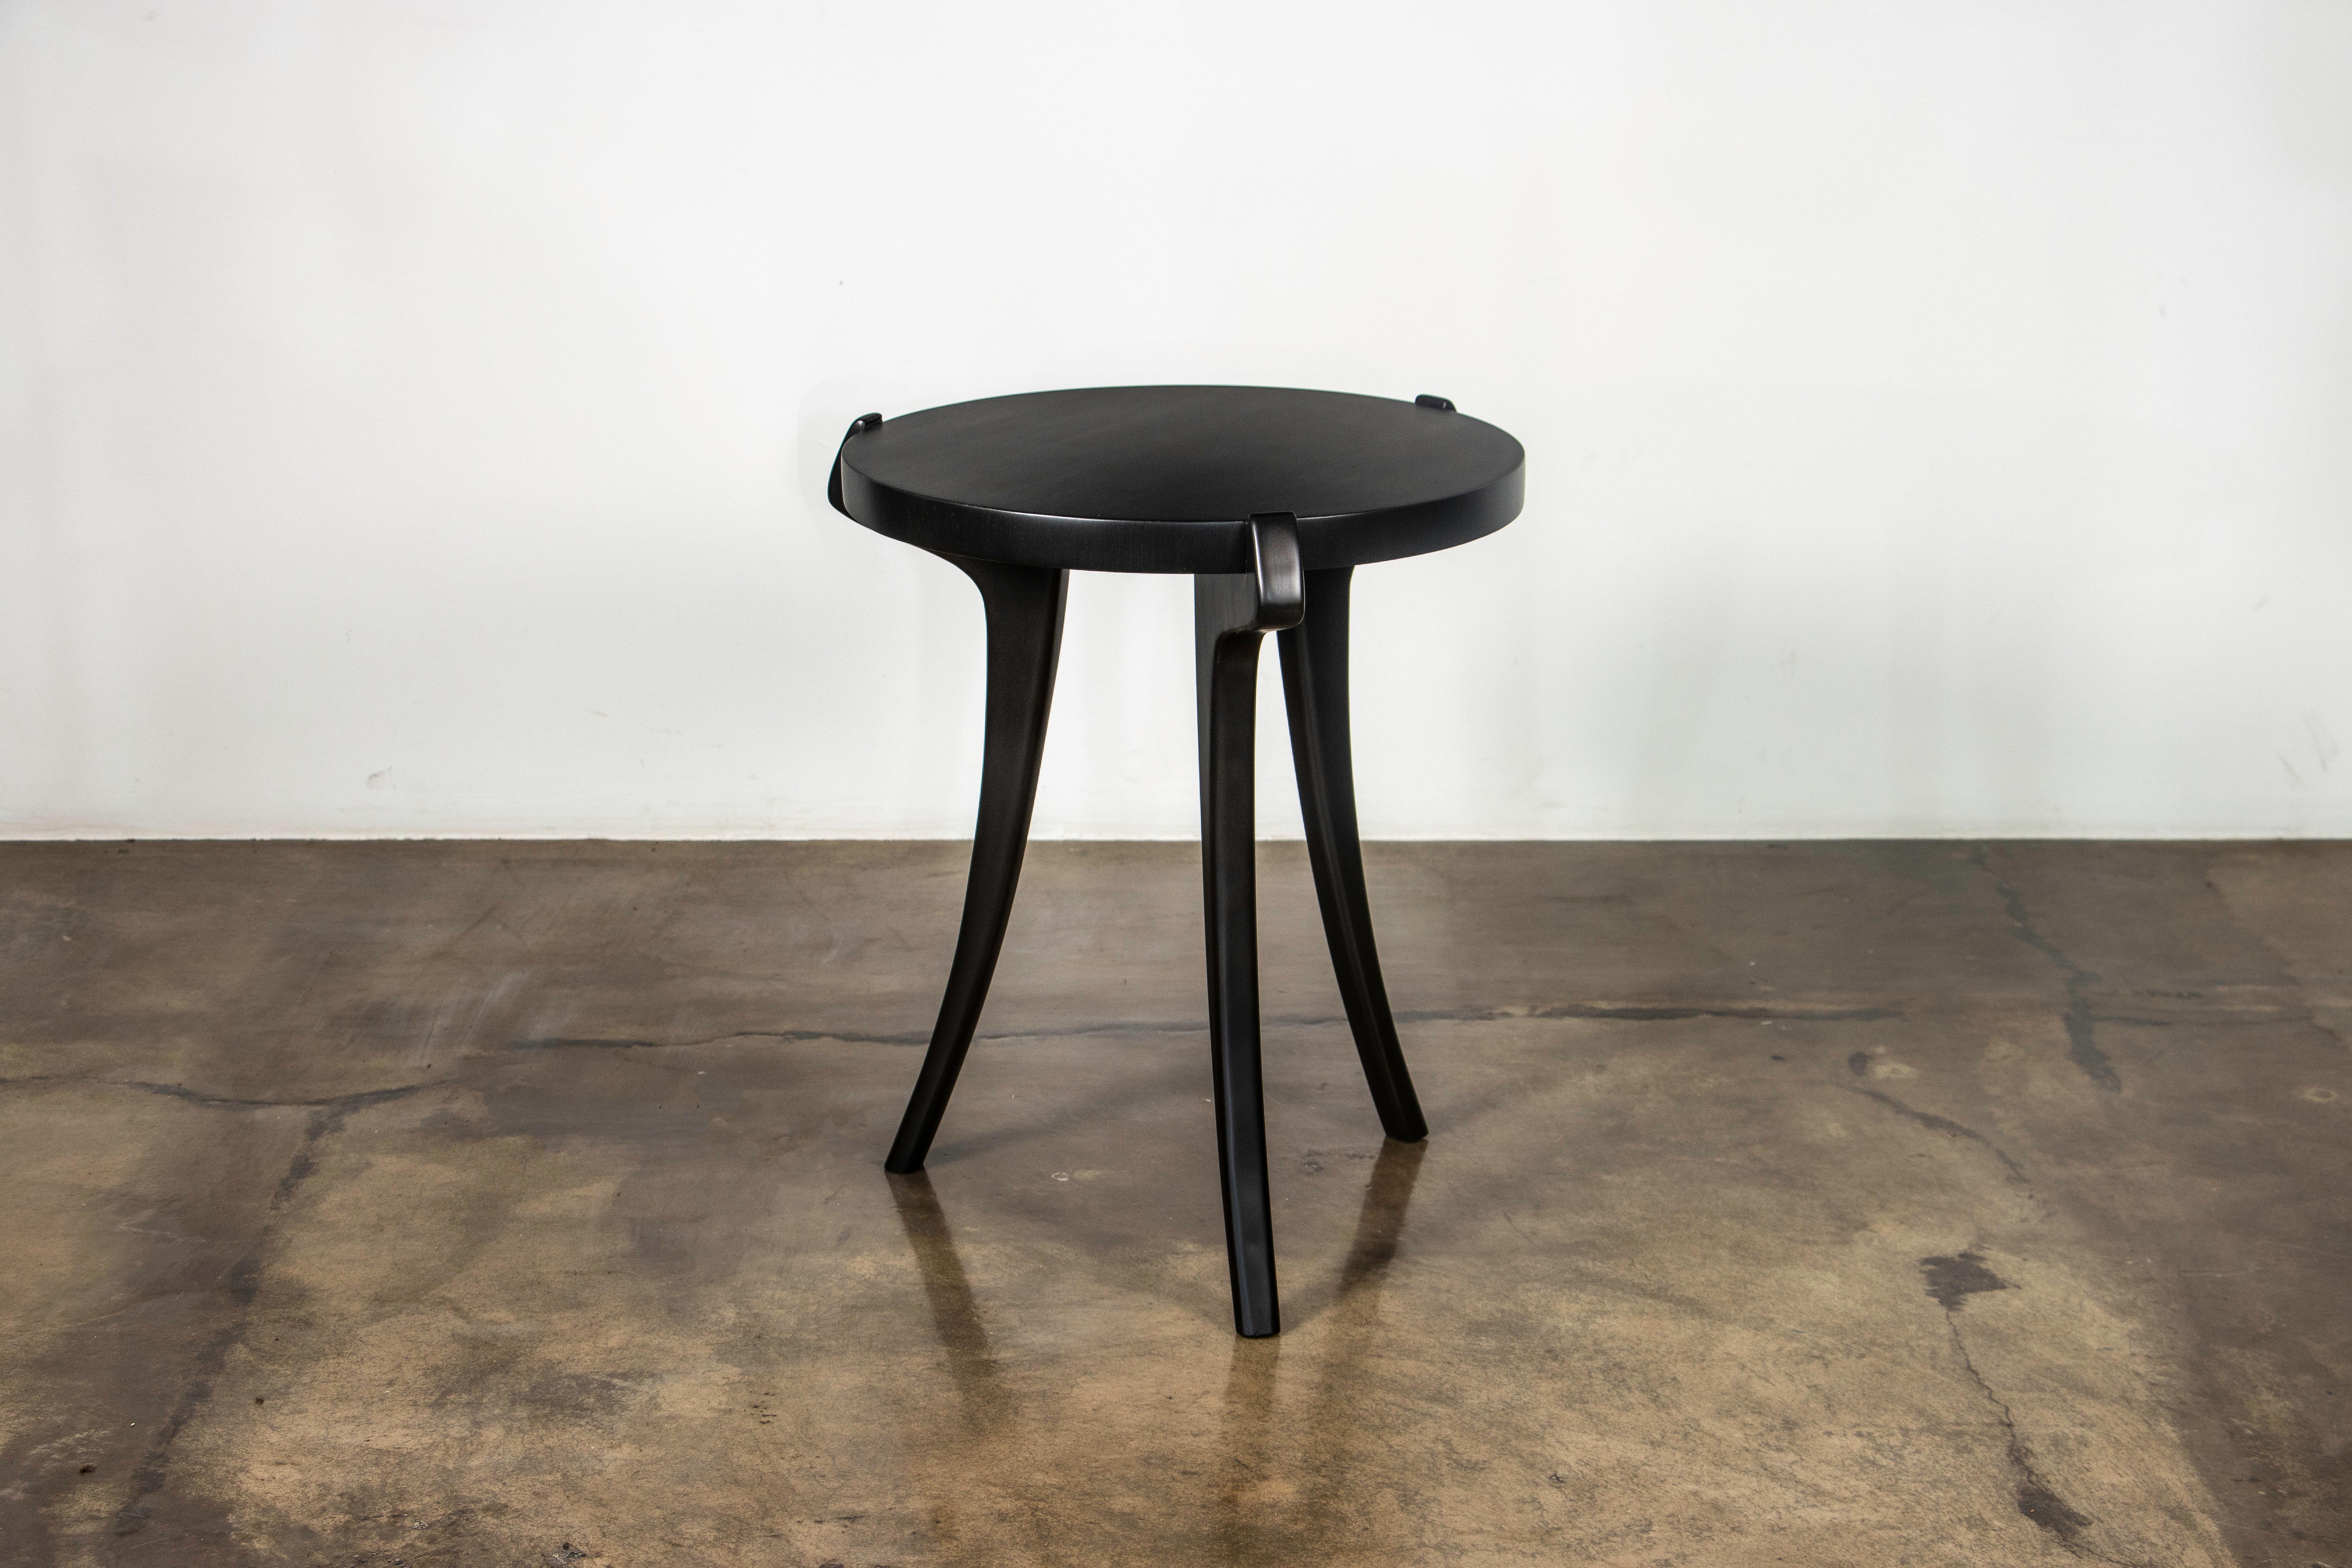 Uccello Sabre Legged Modern Round Side Cocktail Table in Ebony from Costantini

Measurements are 18.5